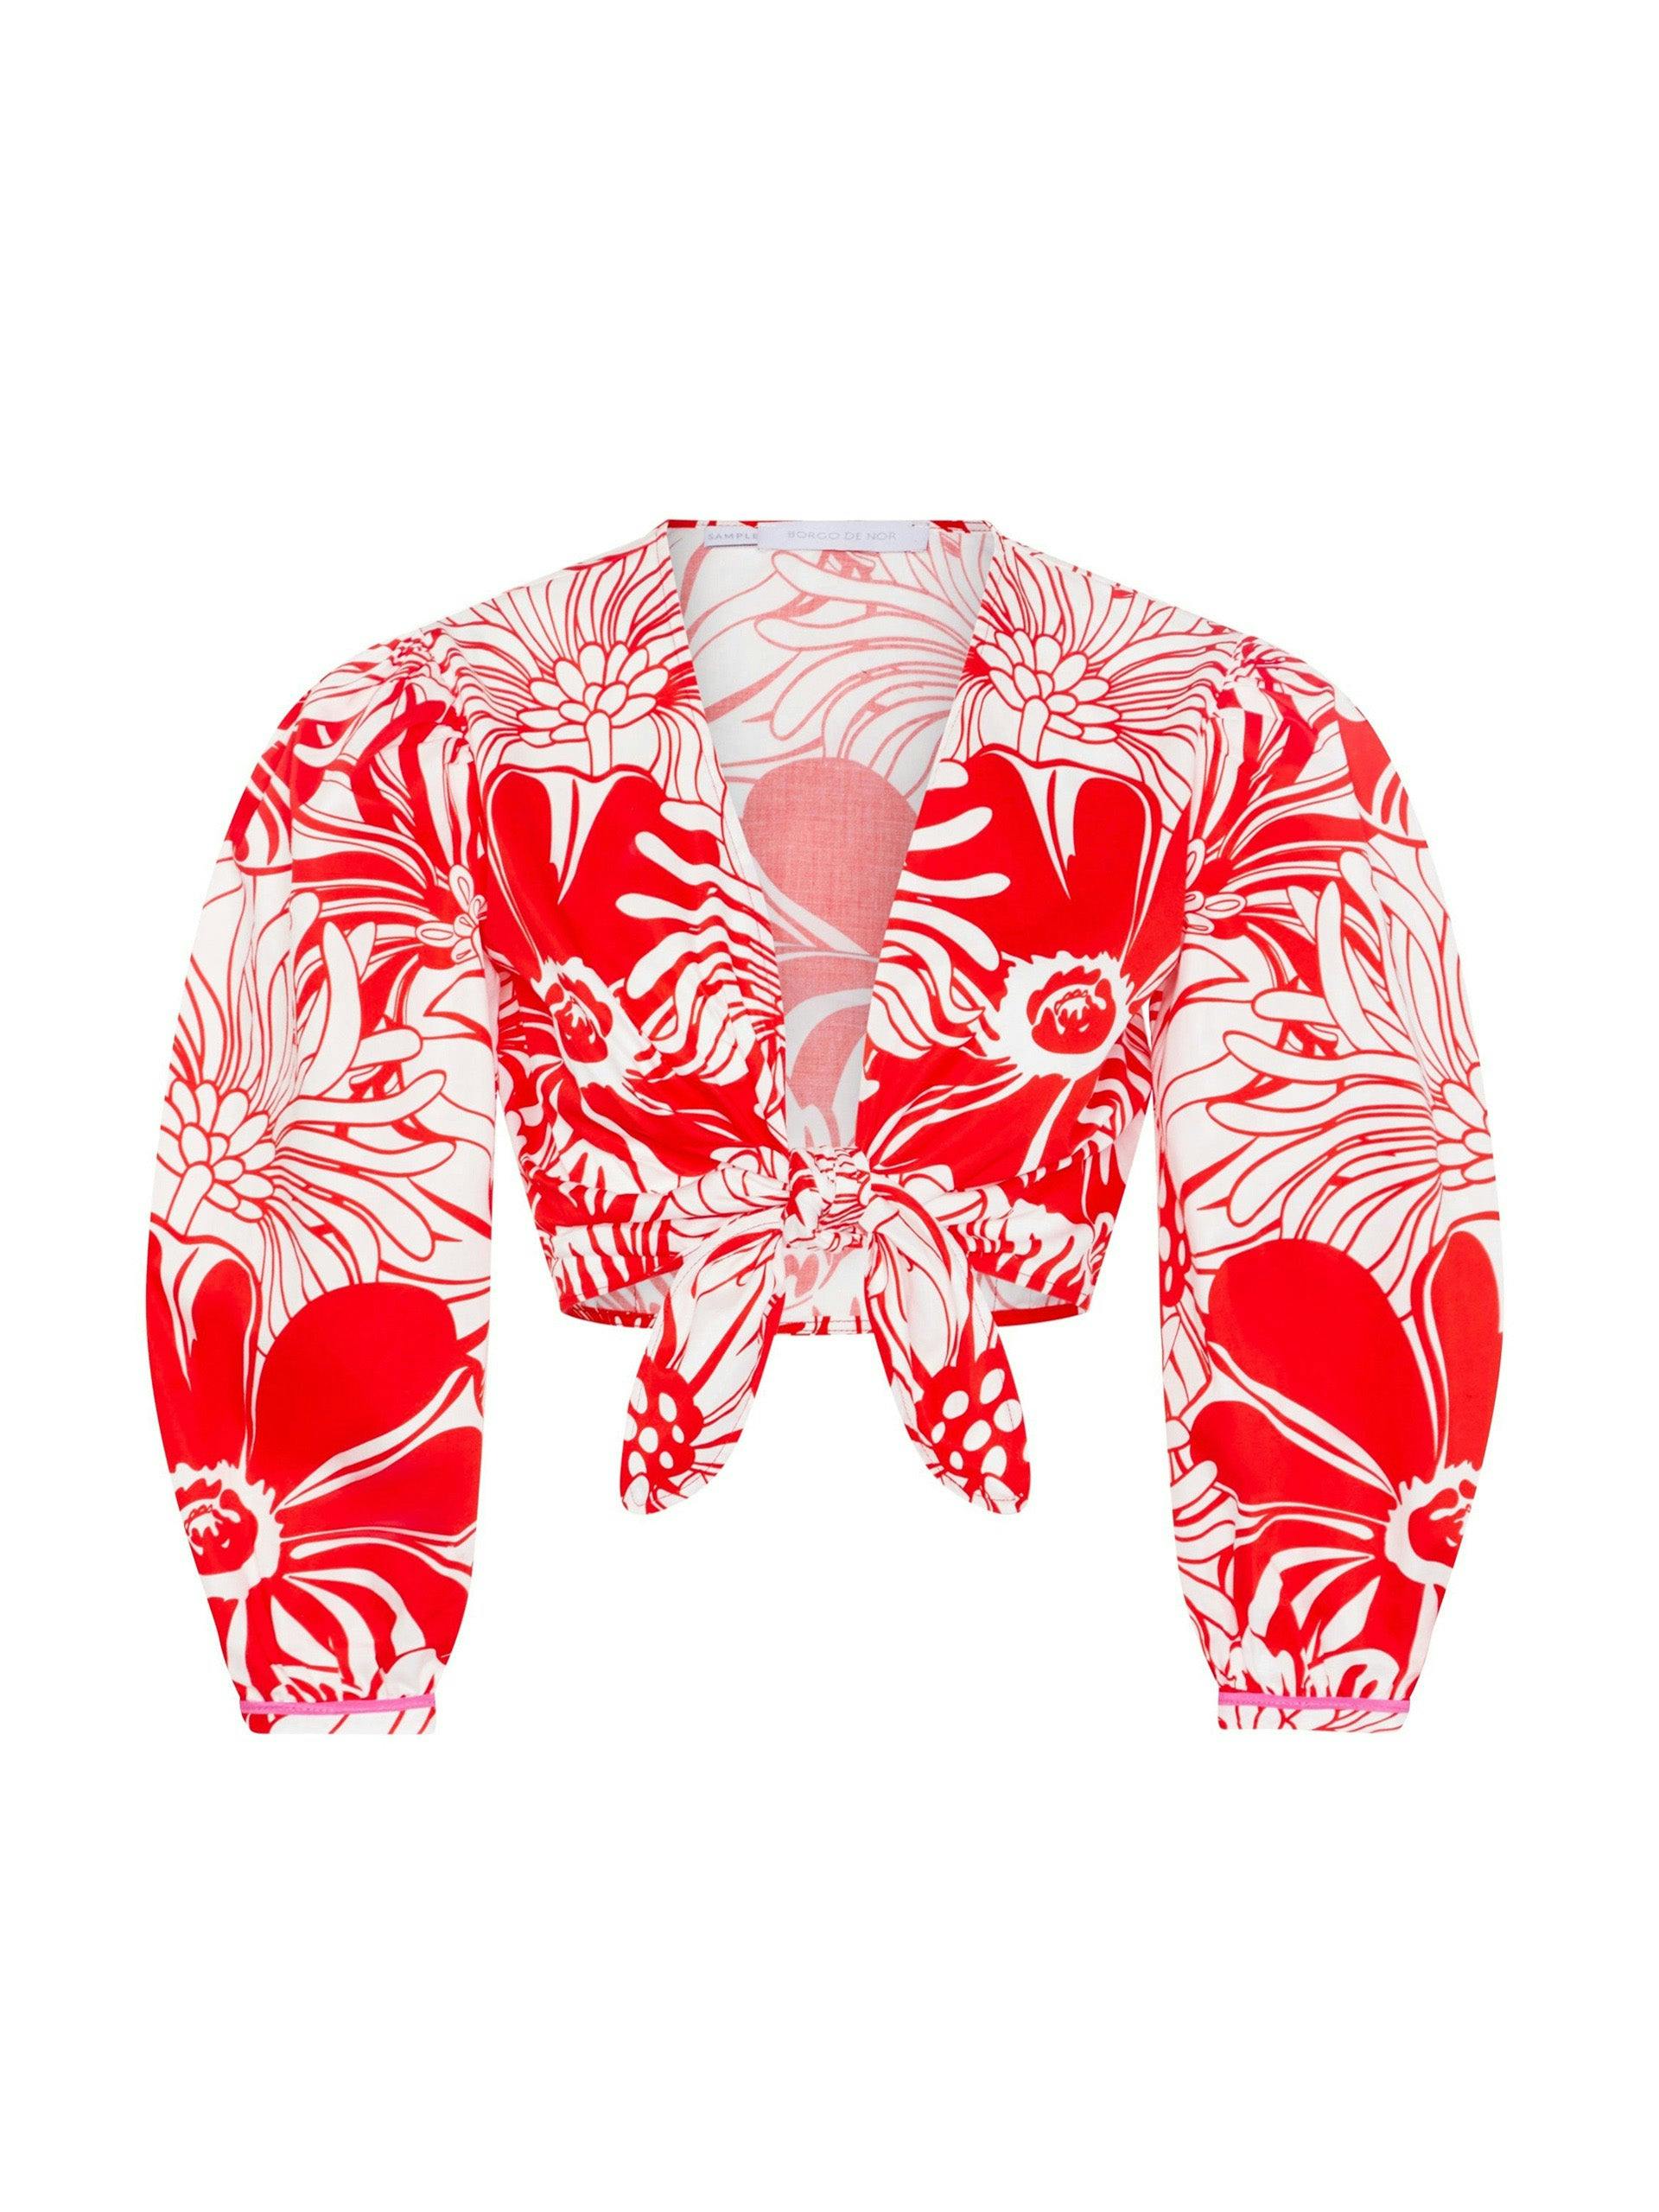 Manuel cotton top in Calypso red floral print